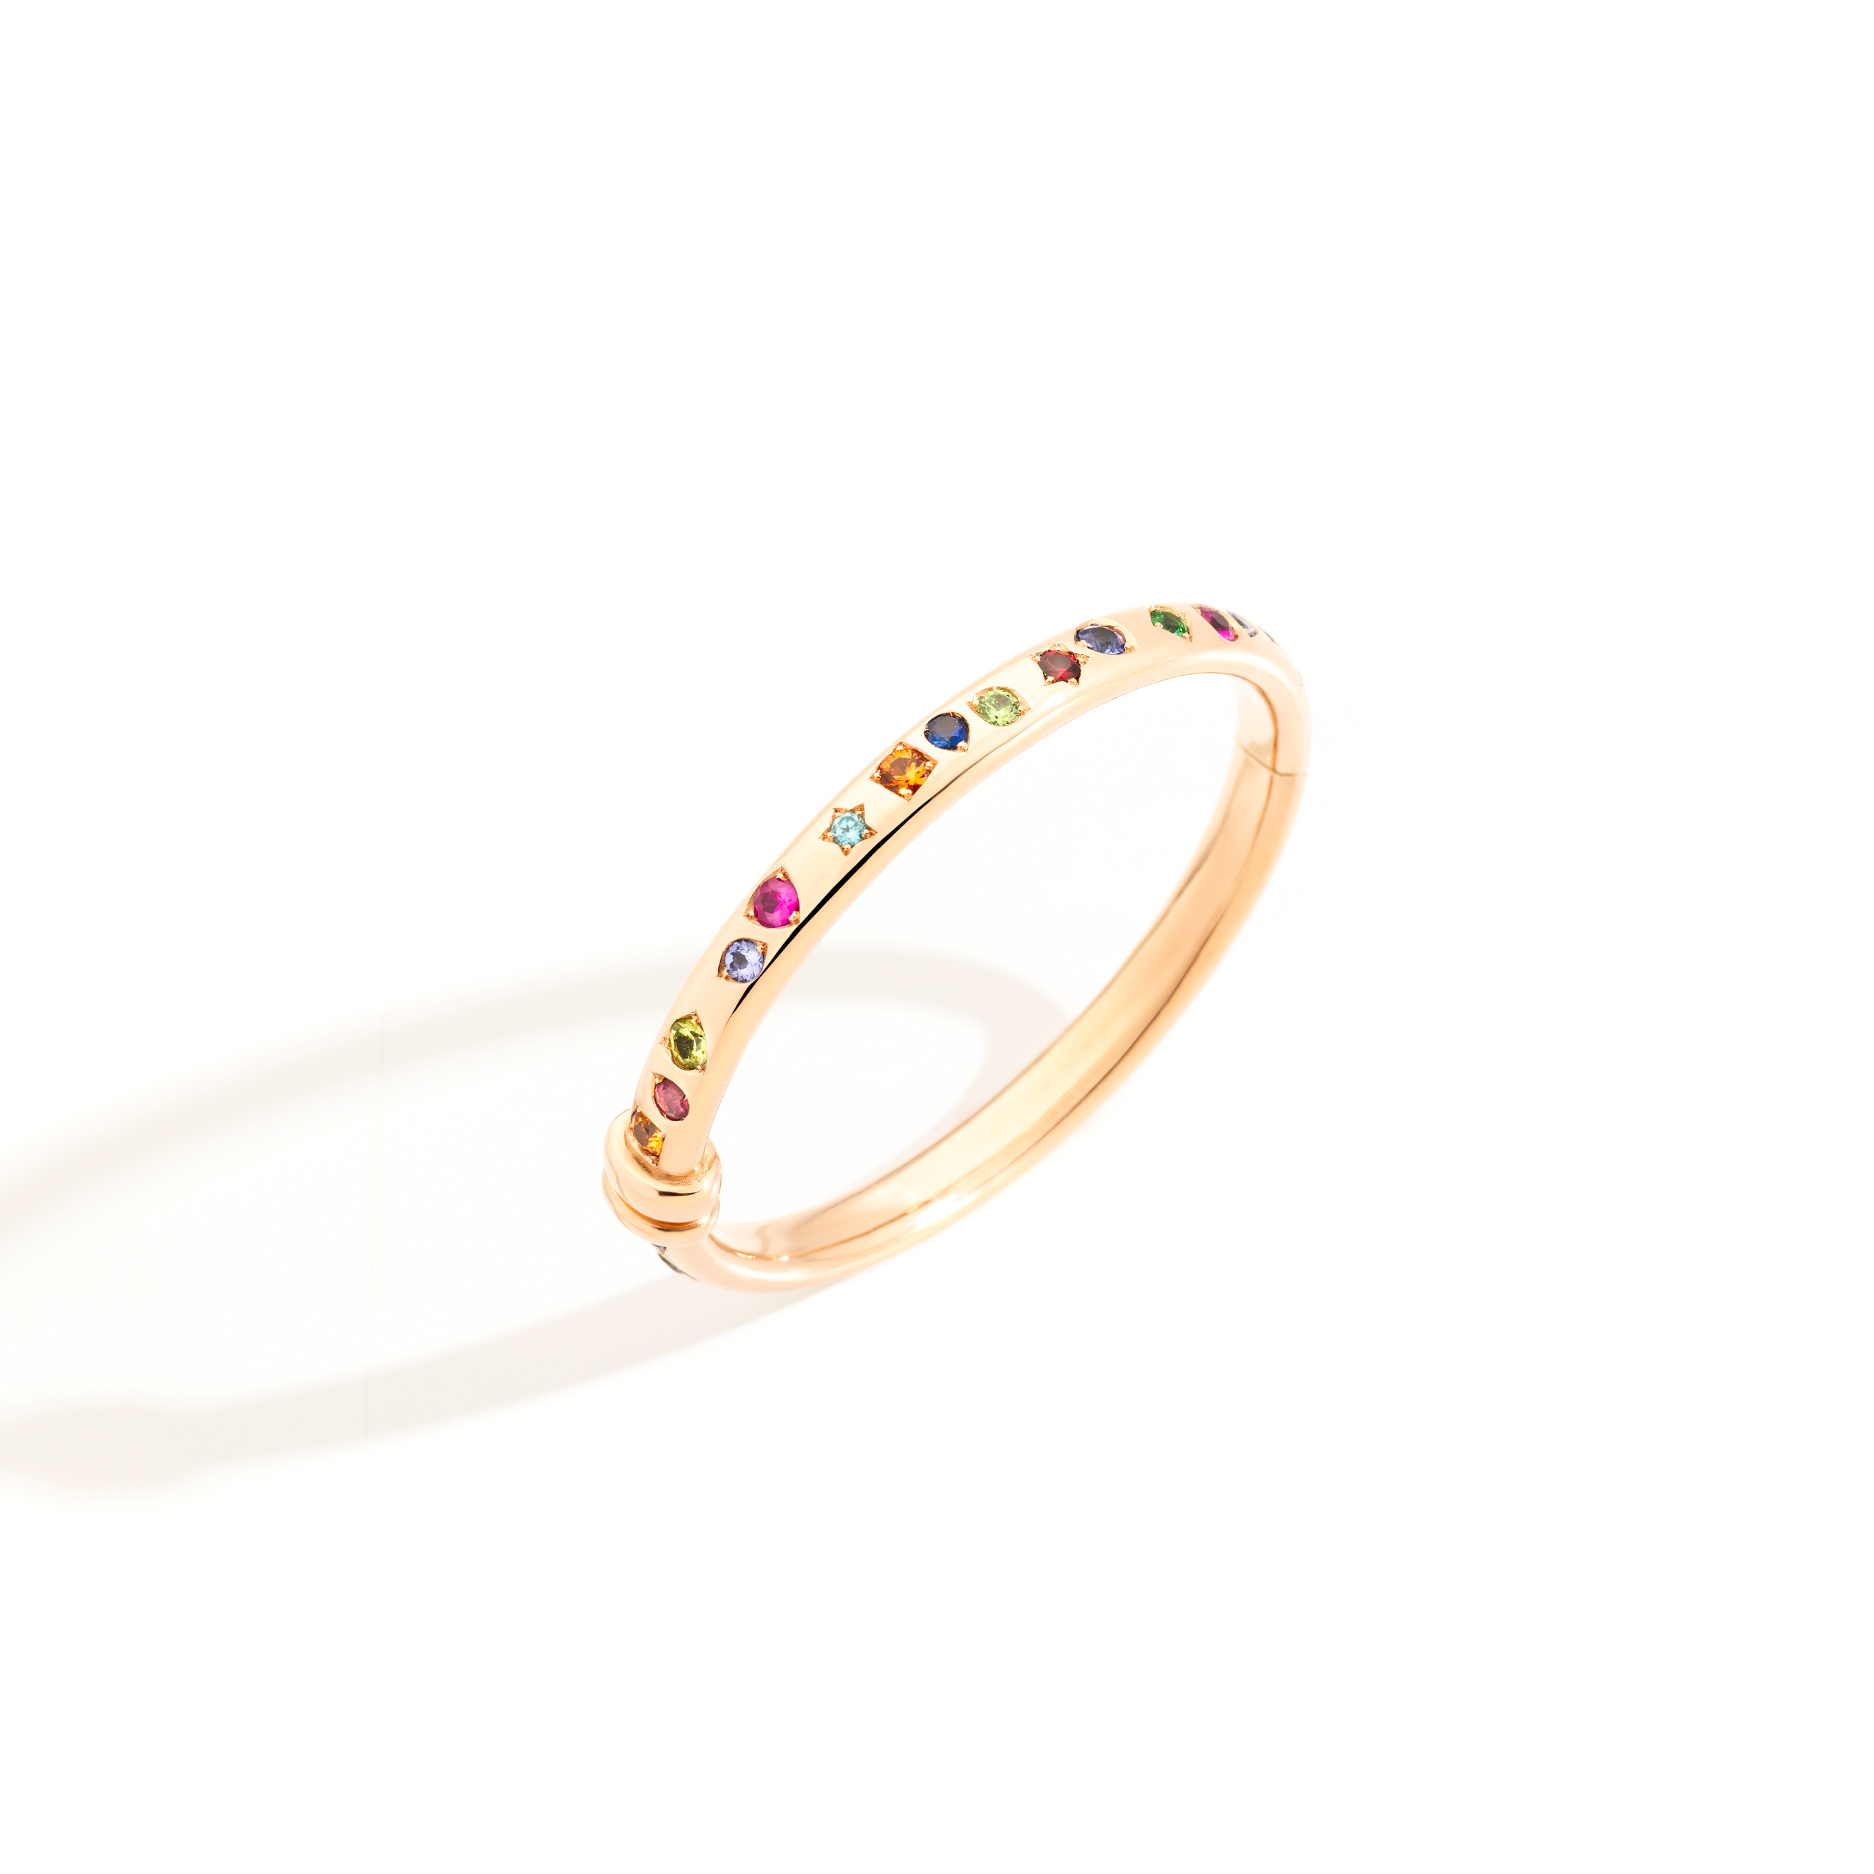 Pomellato Iconica Bangle in 18k Rose Gold with Coloured Gemstones - Orsini Jewellers NZ